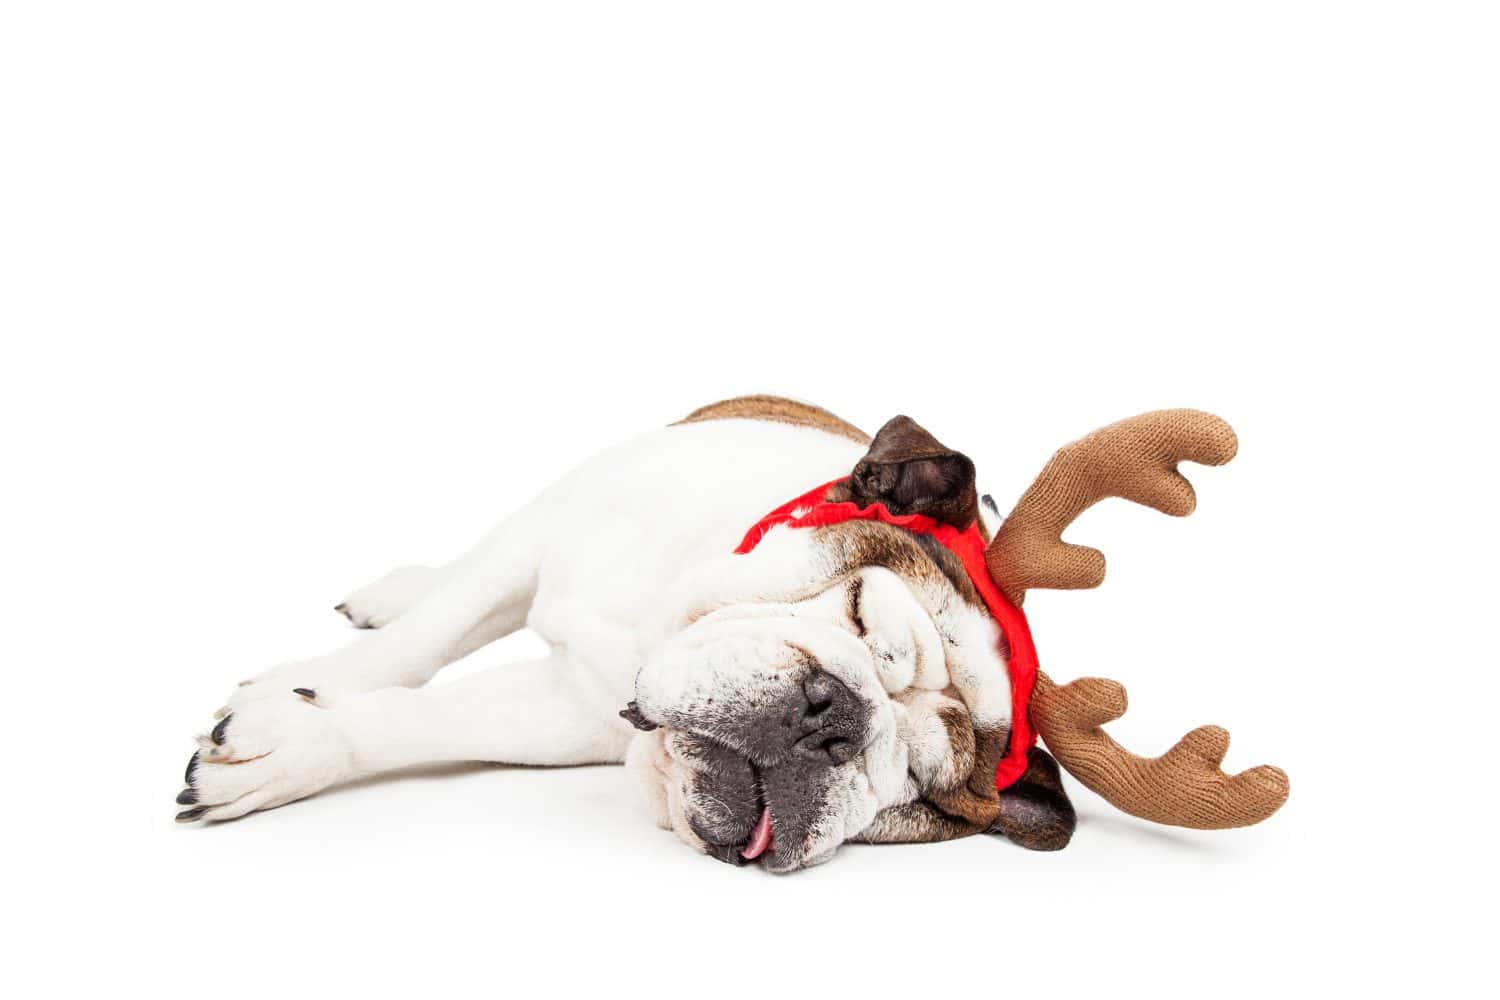 Funny photo of a tired Bulldog laying on her side sleeping while wearing Christmas reindeer antlers